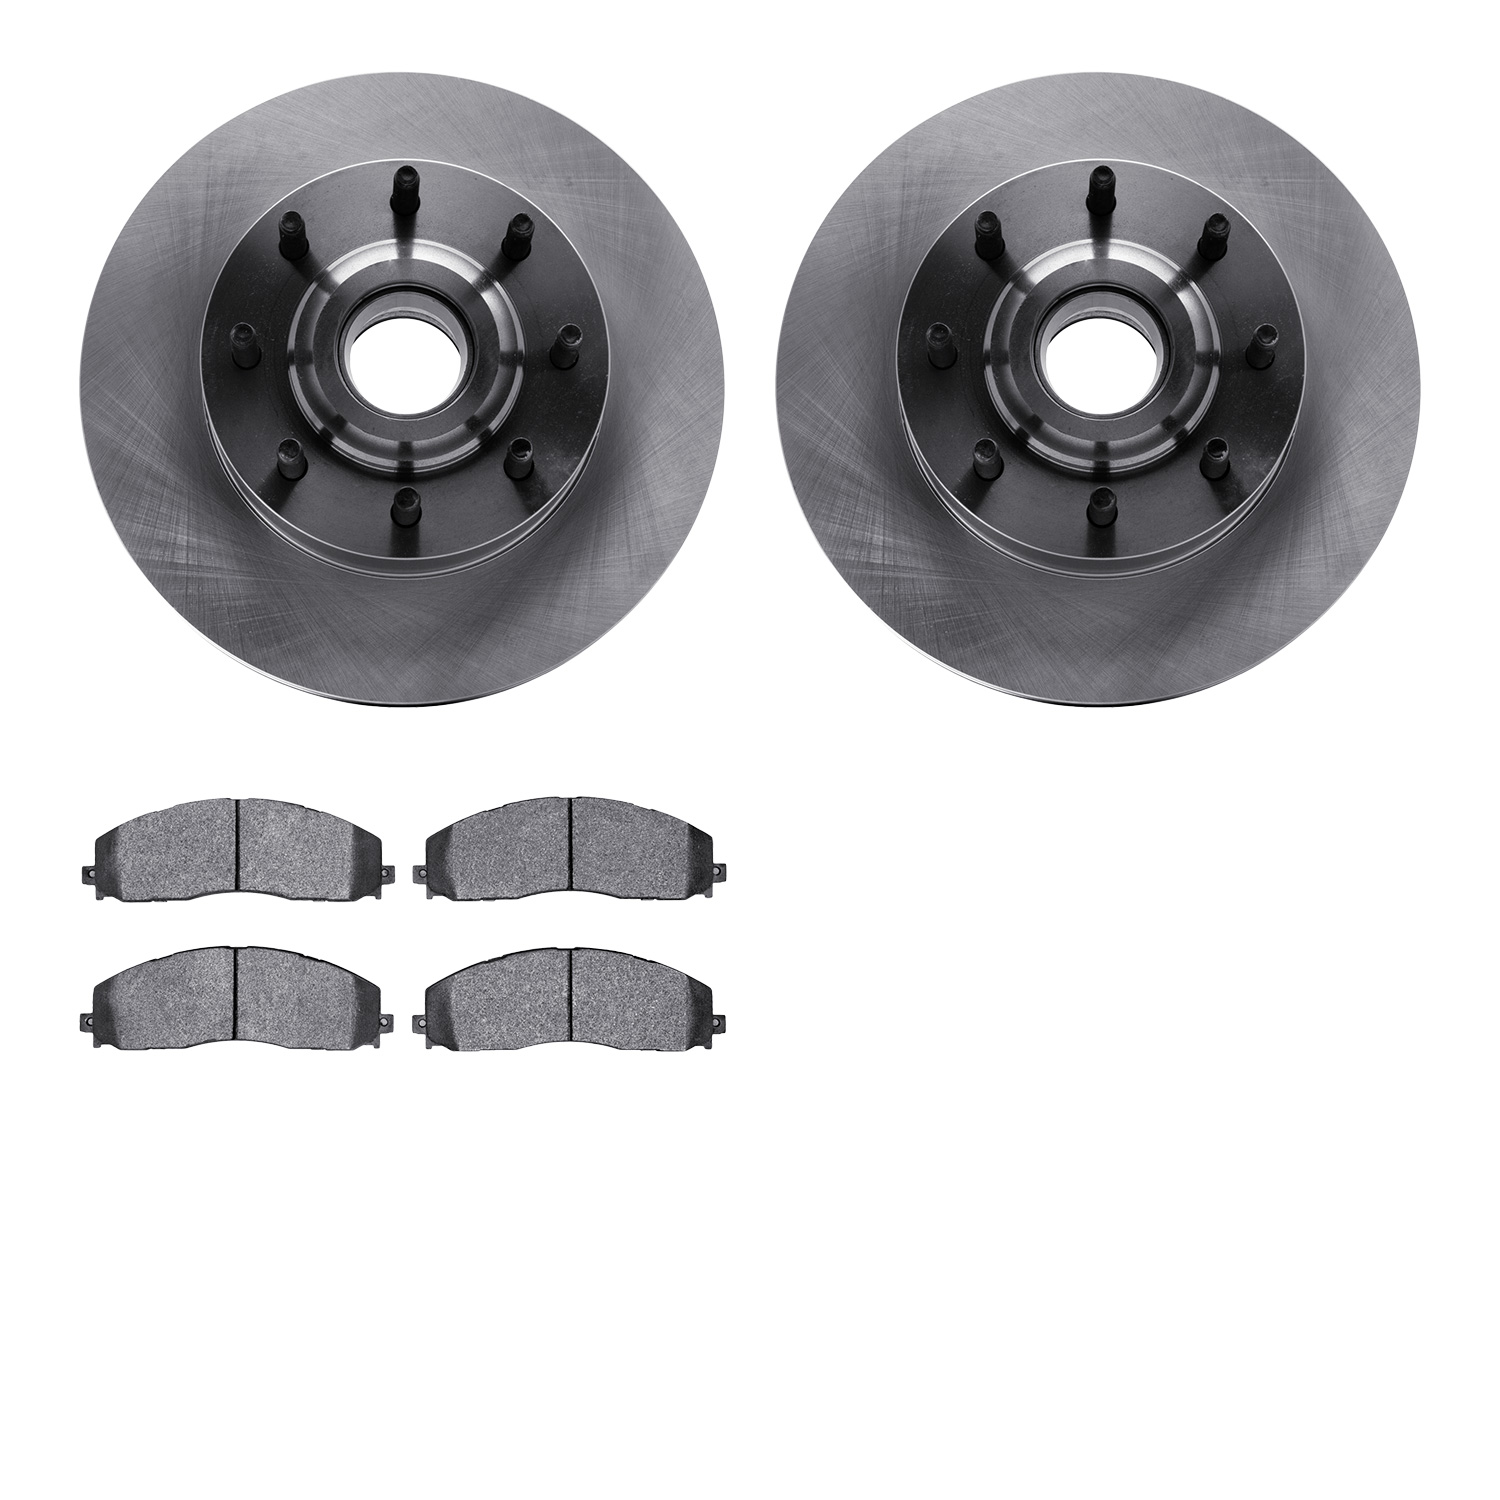 6402-54290 Brake Rotors with Ultimate-Duty Brake Pads, Fits Select Ford/Lincoln/Mercury/Mazda, Position: Front